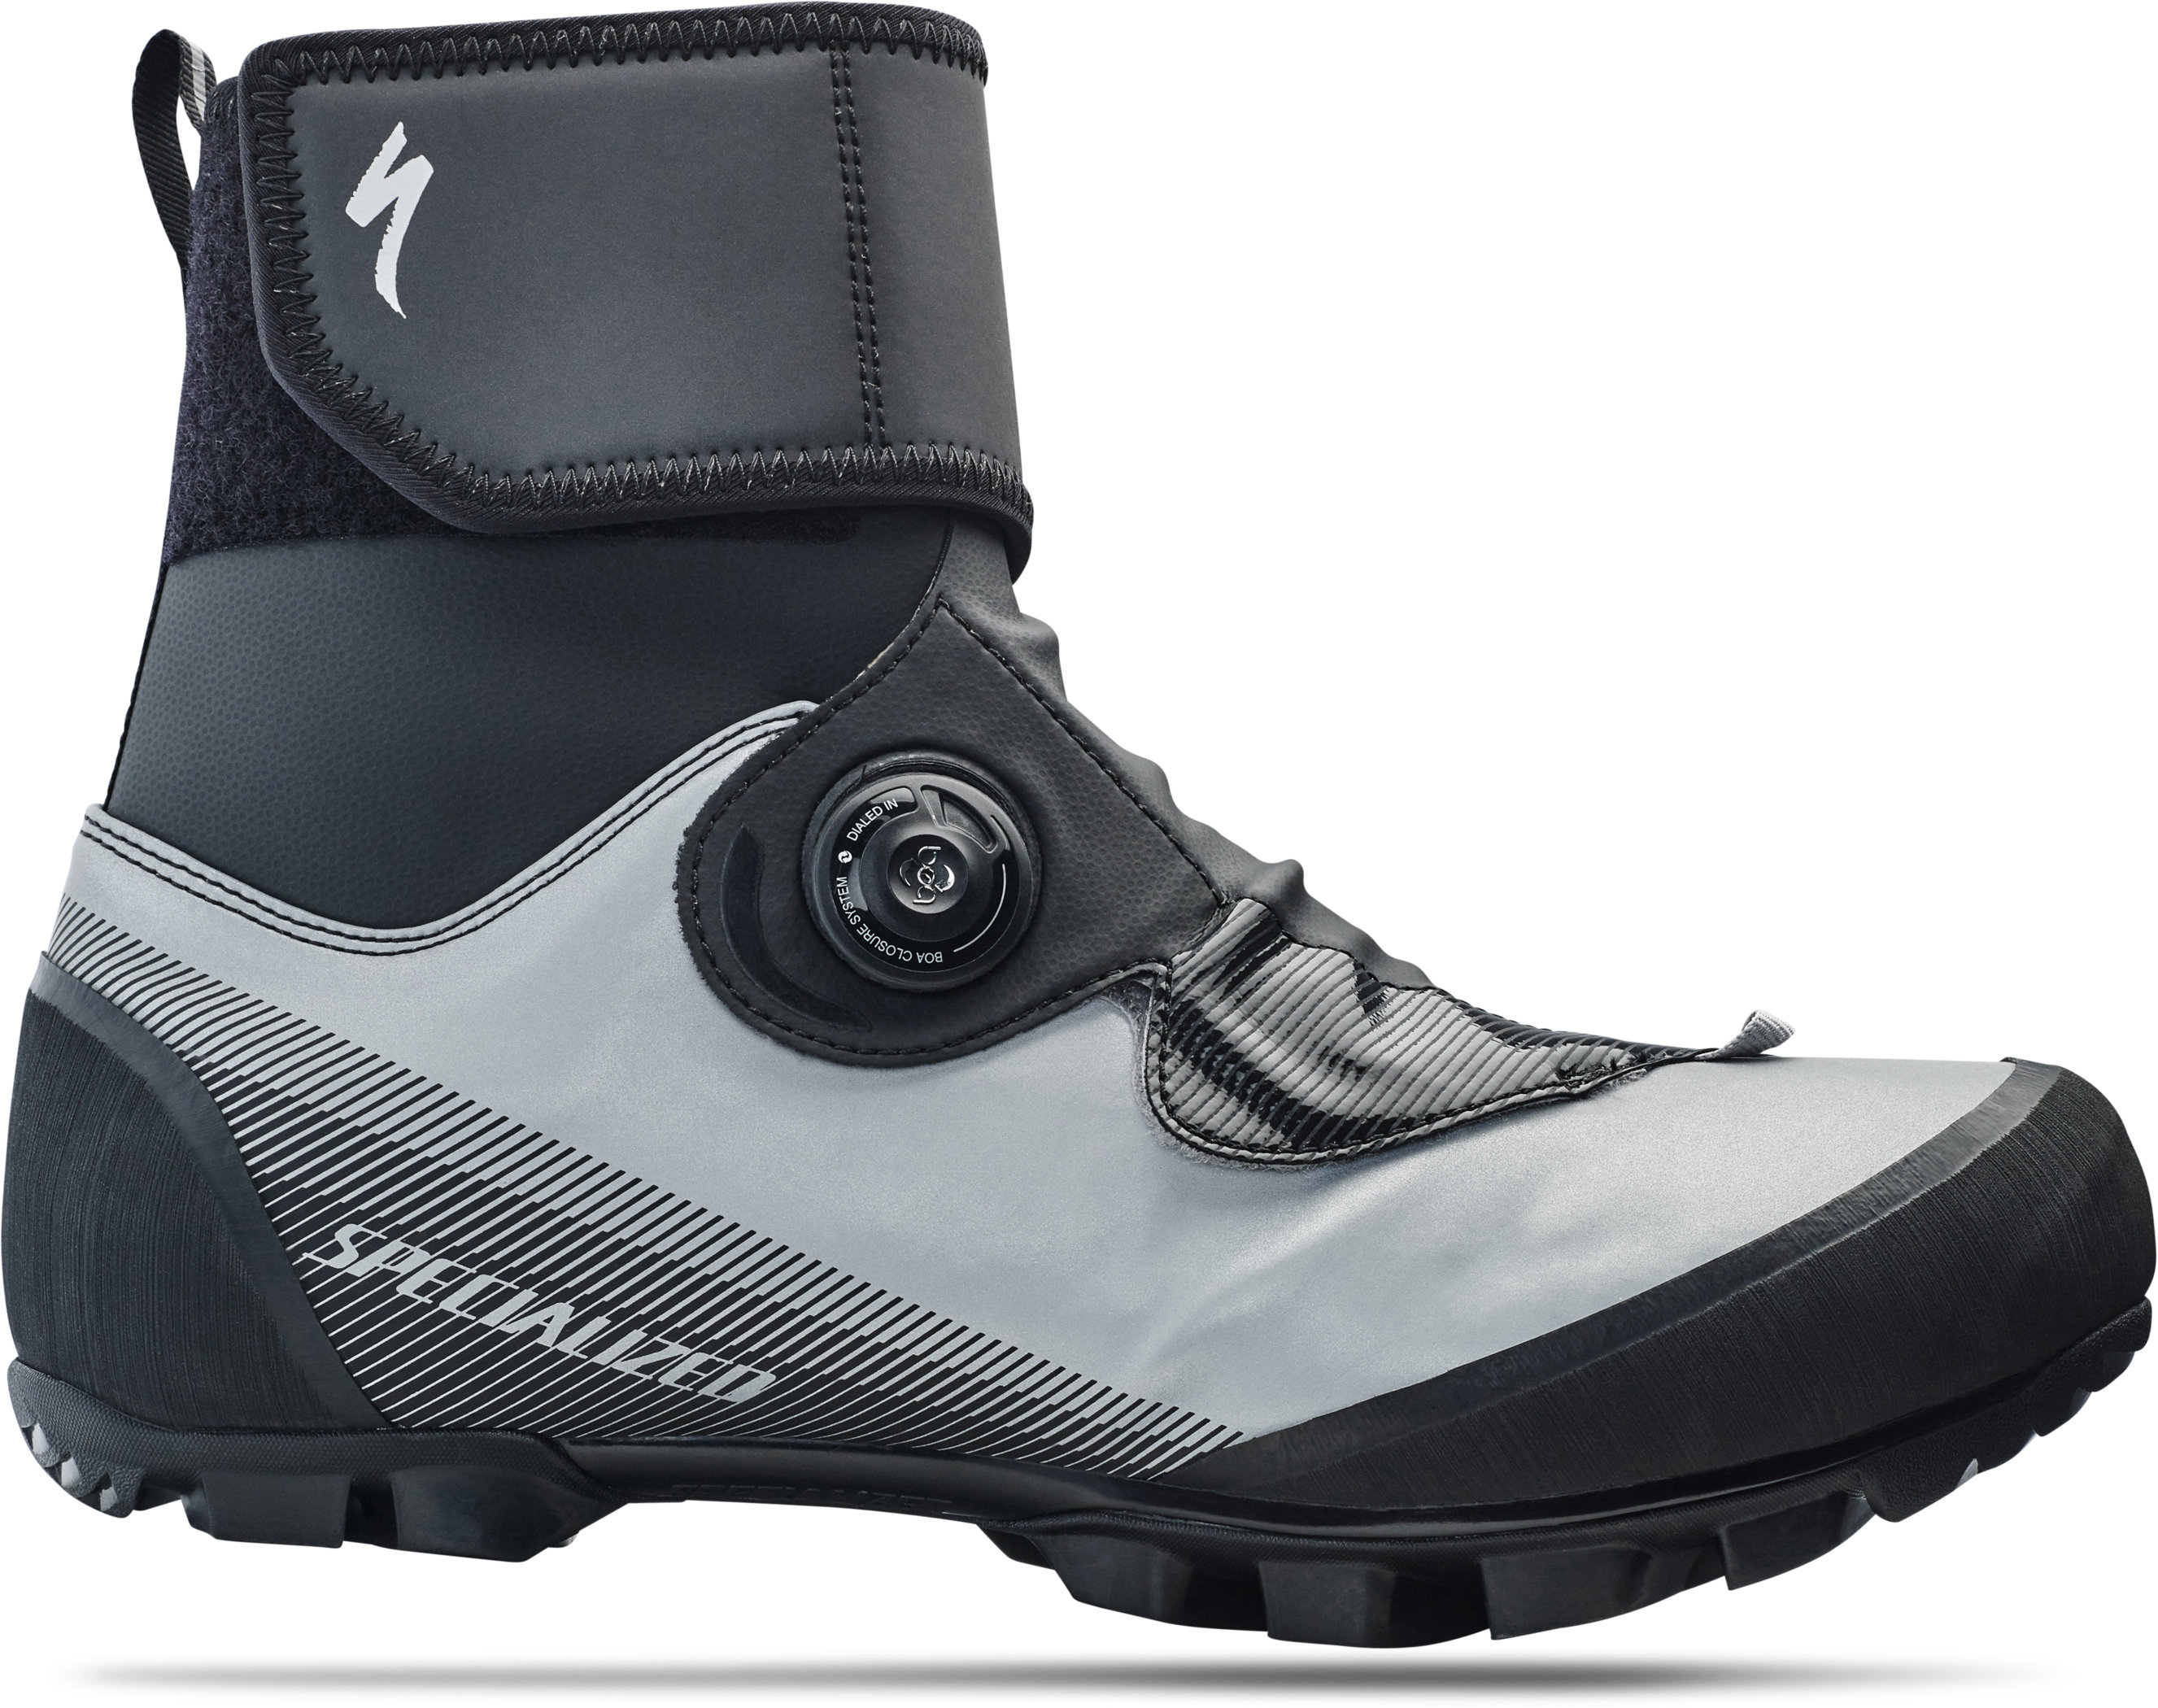 Defroster Trail Mountain Bike Shoes | Specialized.com